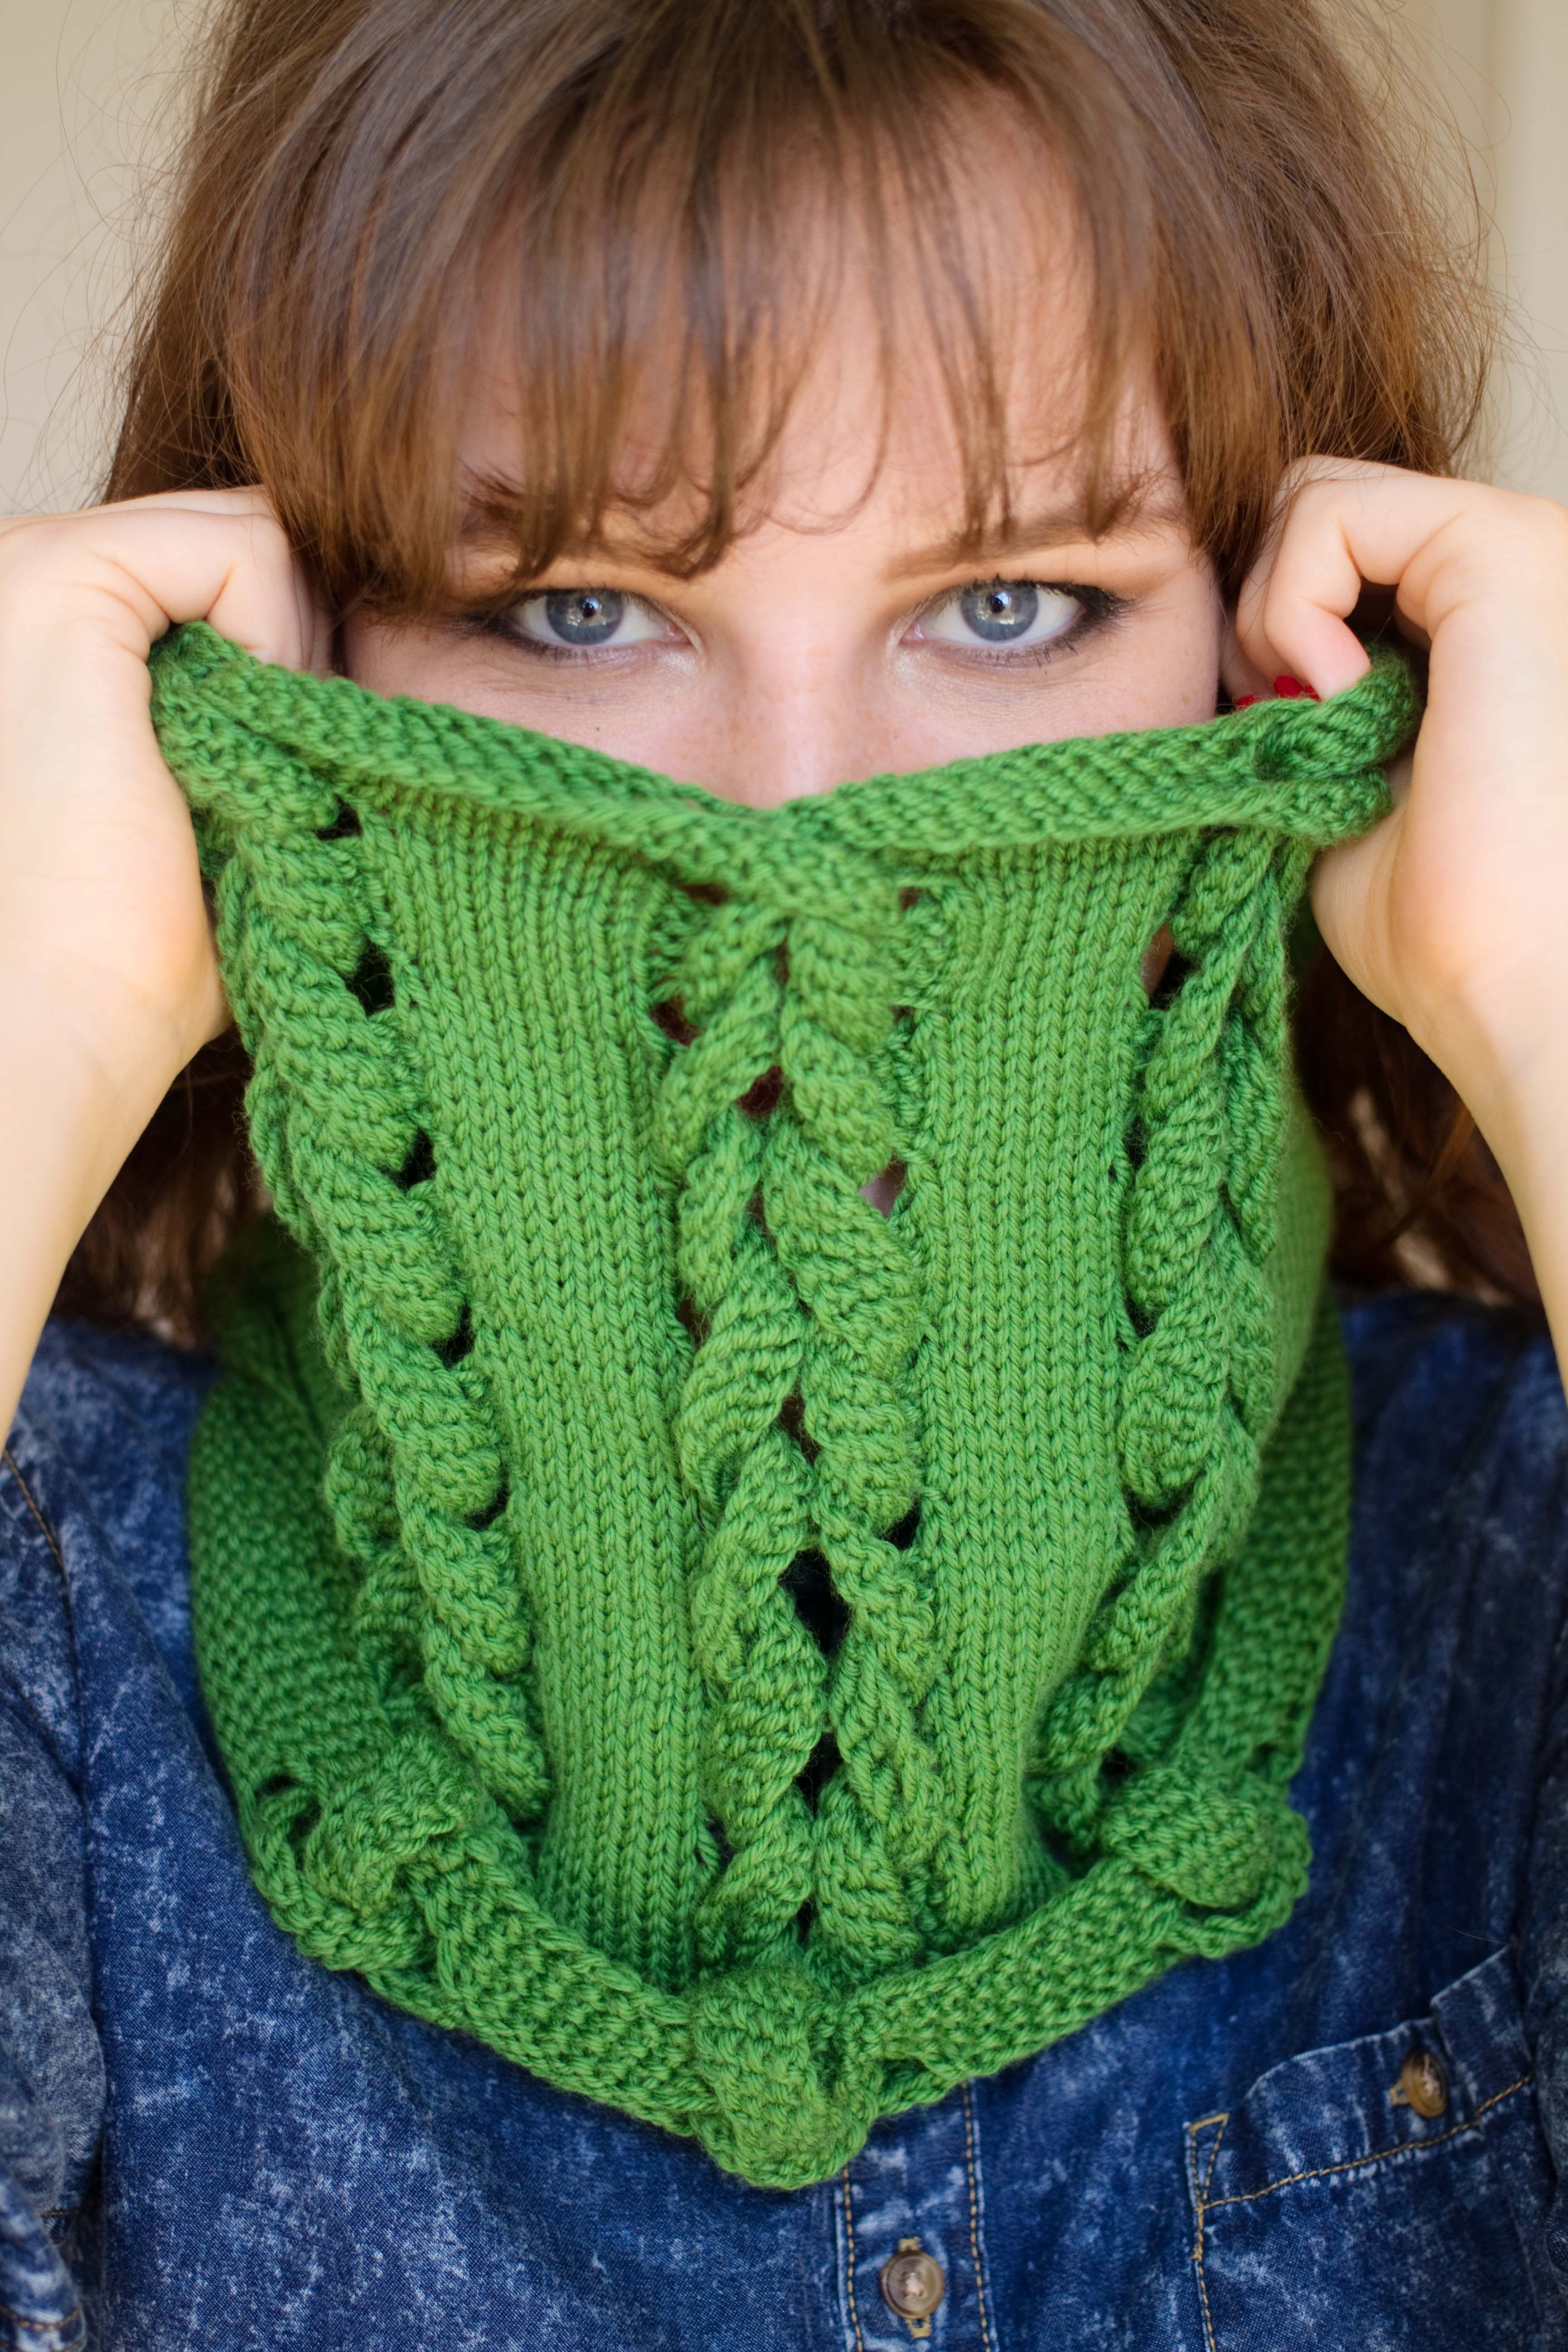 Pleach cowl pattern by Lily Kate France for Yarn Stories